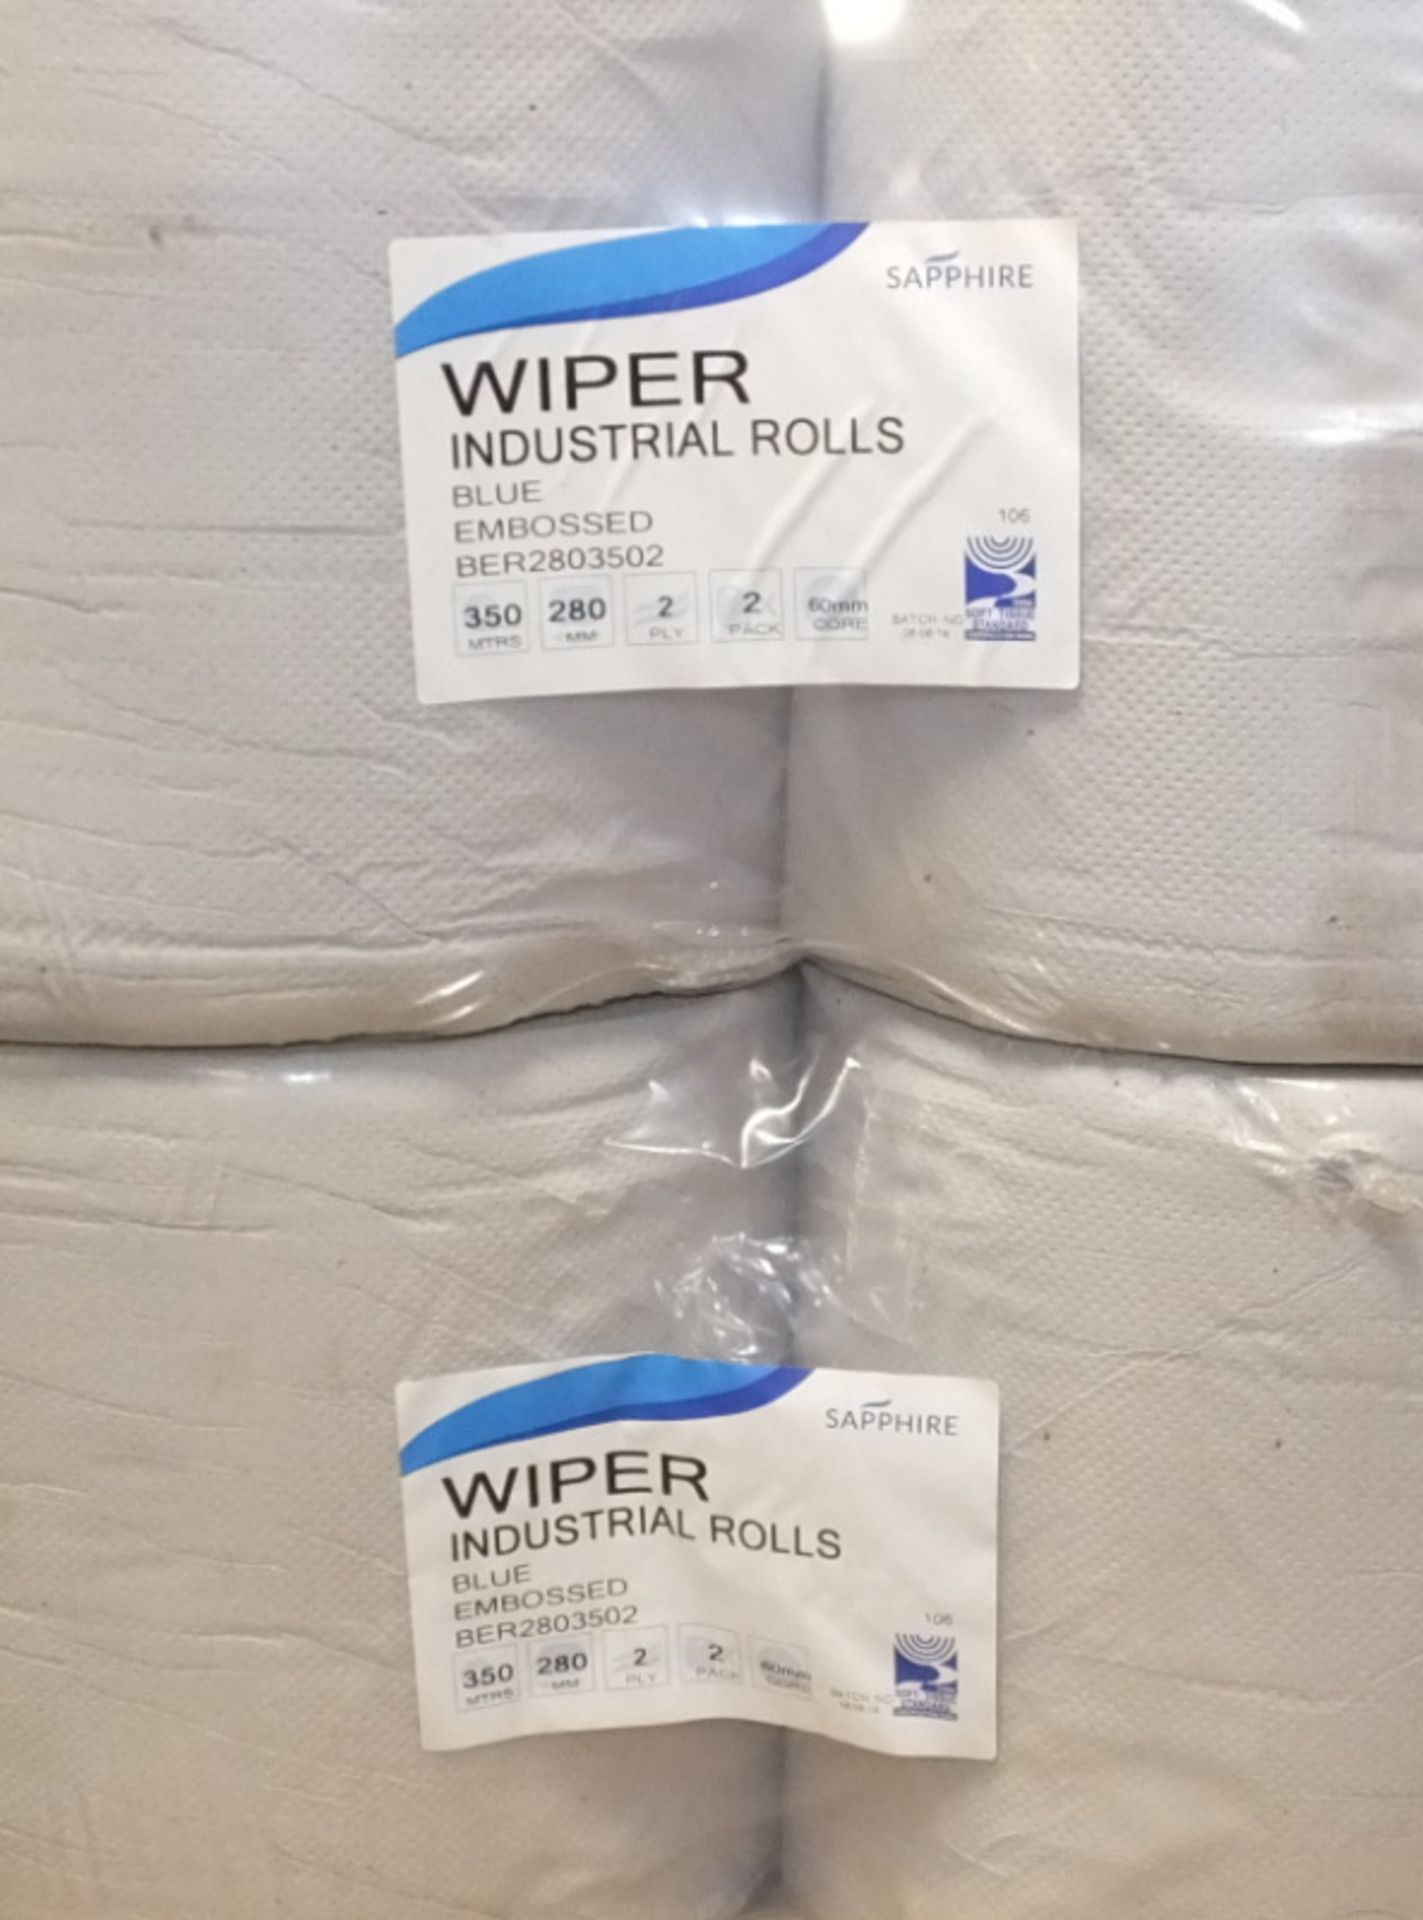 4x Sapphire Wiper Industrial rolls 2 ply - 2 per pack & 4x Sapphire Cento Centrefeed Rolls - Image 3 of 3